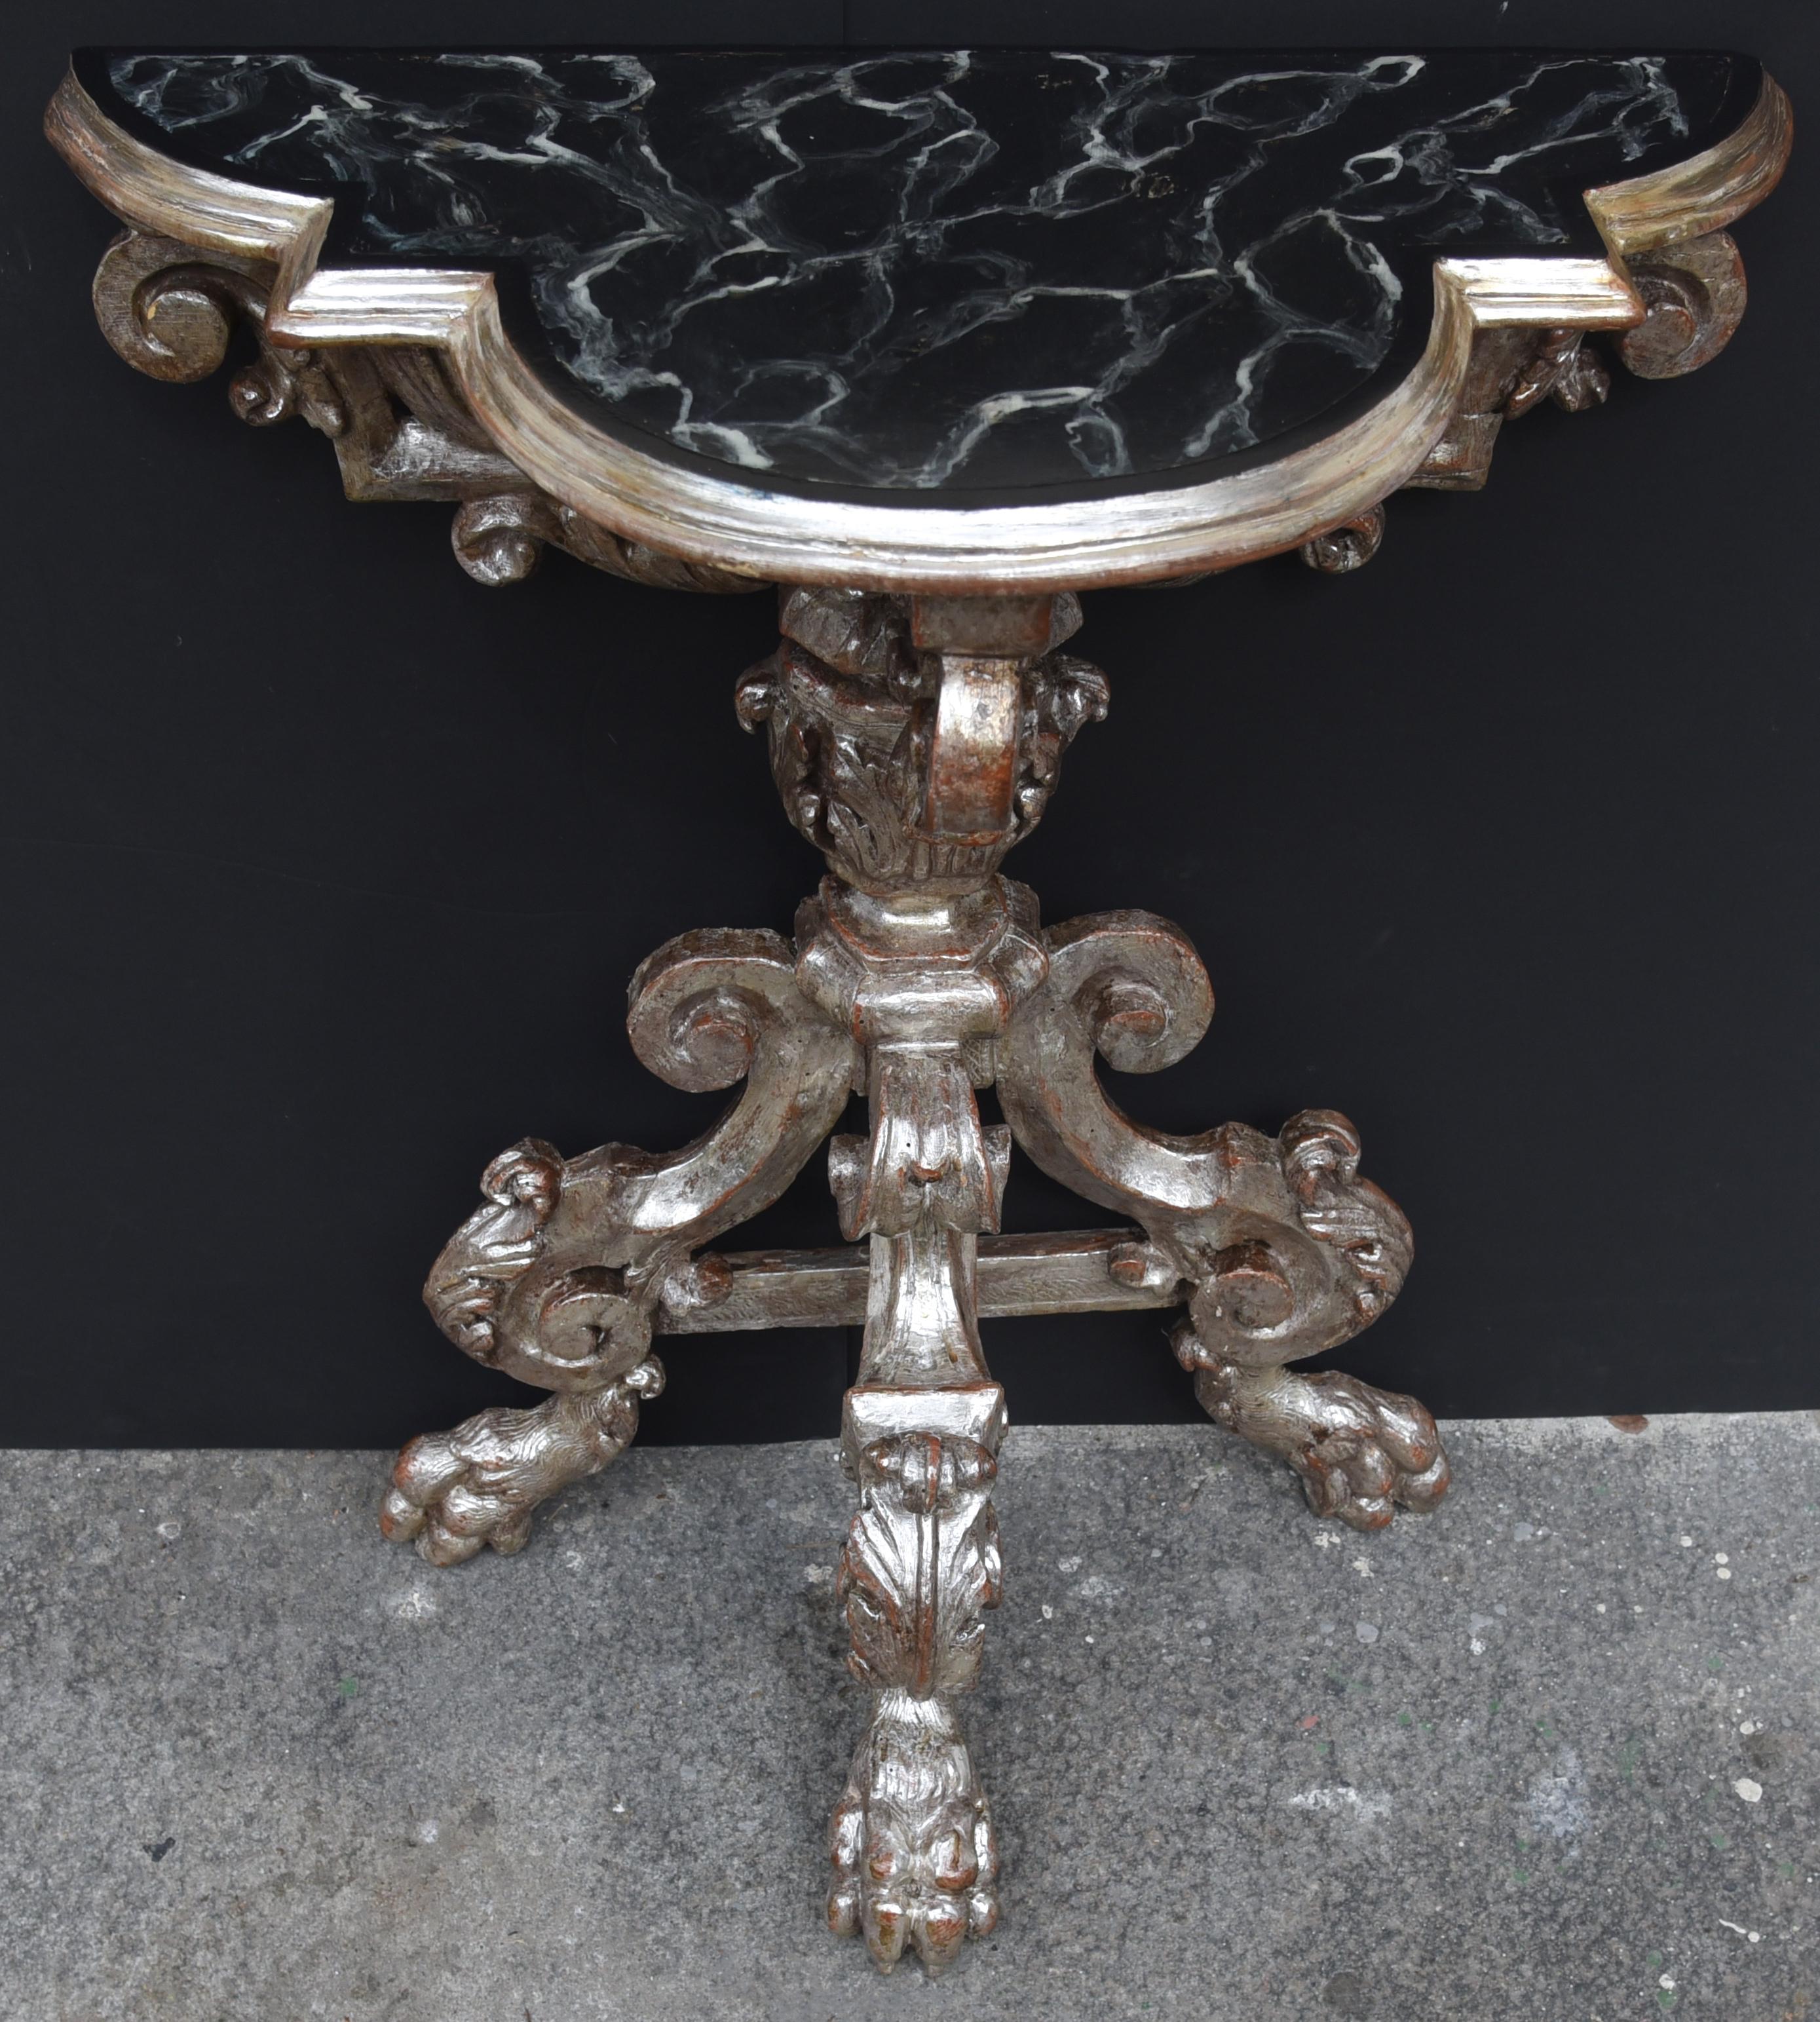 Refined console table with wooden top in imitation marble, carved and silvered wood with real silver, Luigi XIV style, origin Italy, made around the end of 1600.

This object is subject to the superintendence of the fine arts, therefore it must be